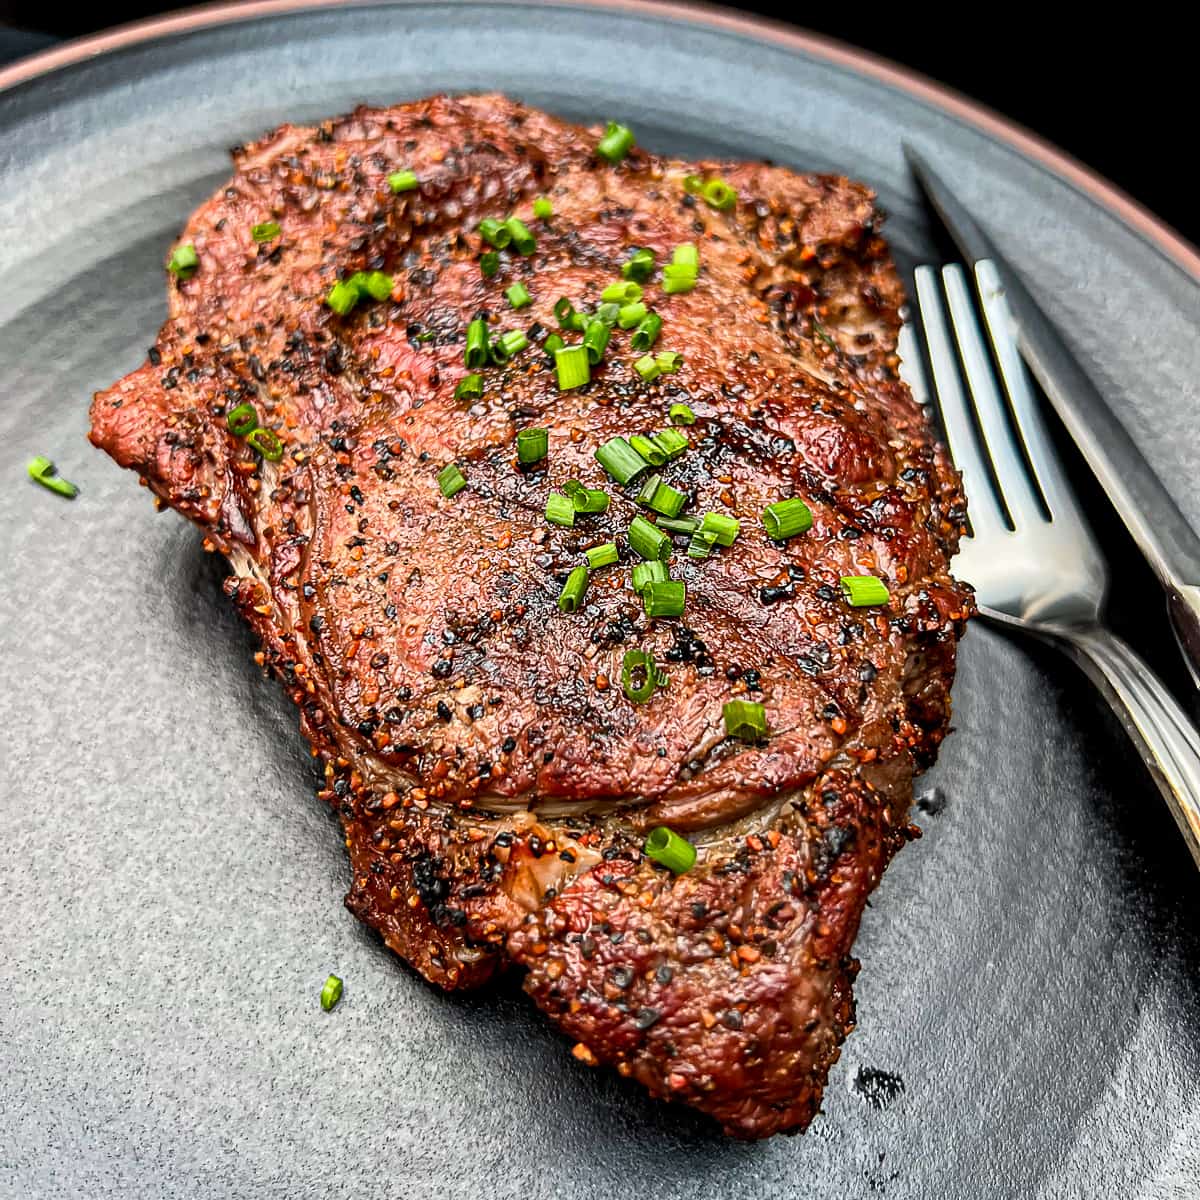 How Long to Cook Ribeye Steak on George Foreman Grill? 